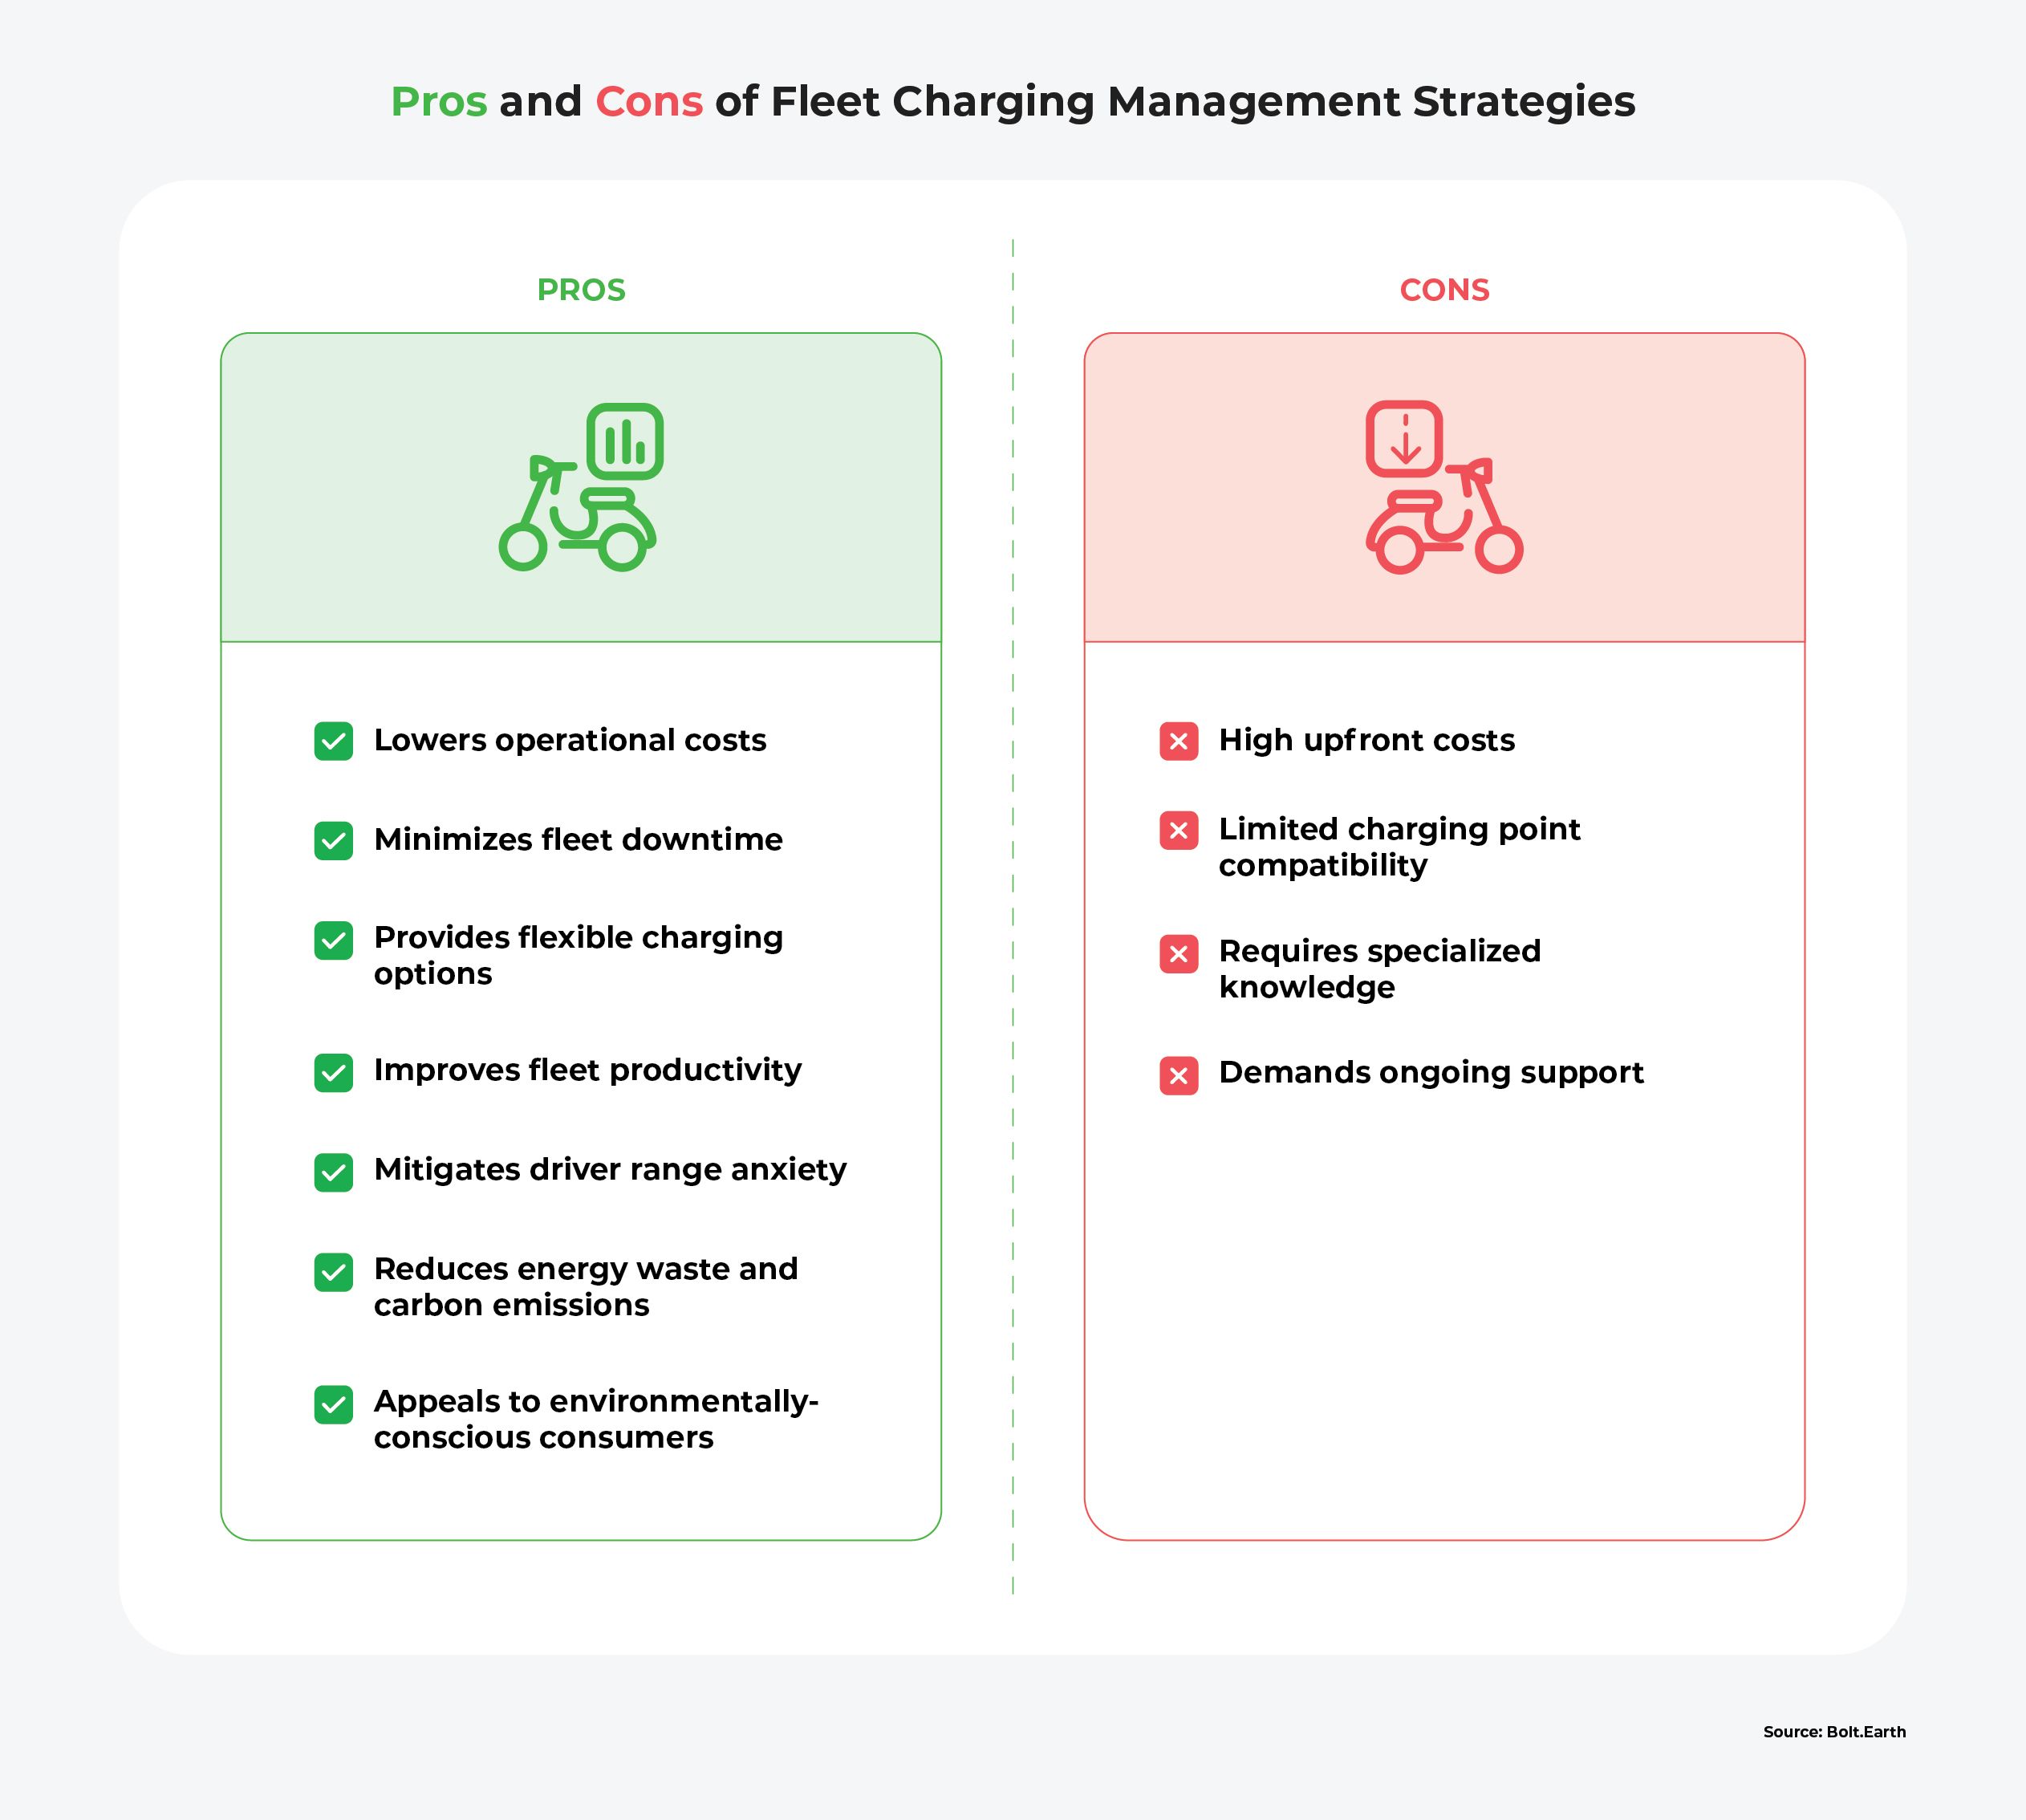 List of the pros and cons of EV fleet charging management strategies